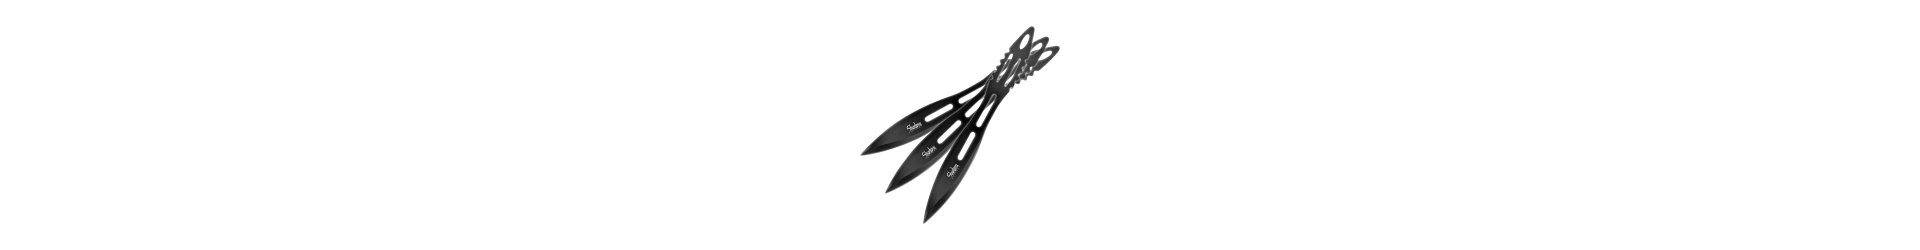 Throwing knives